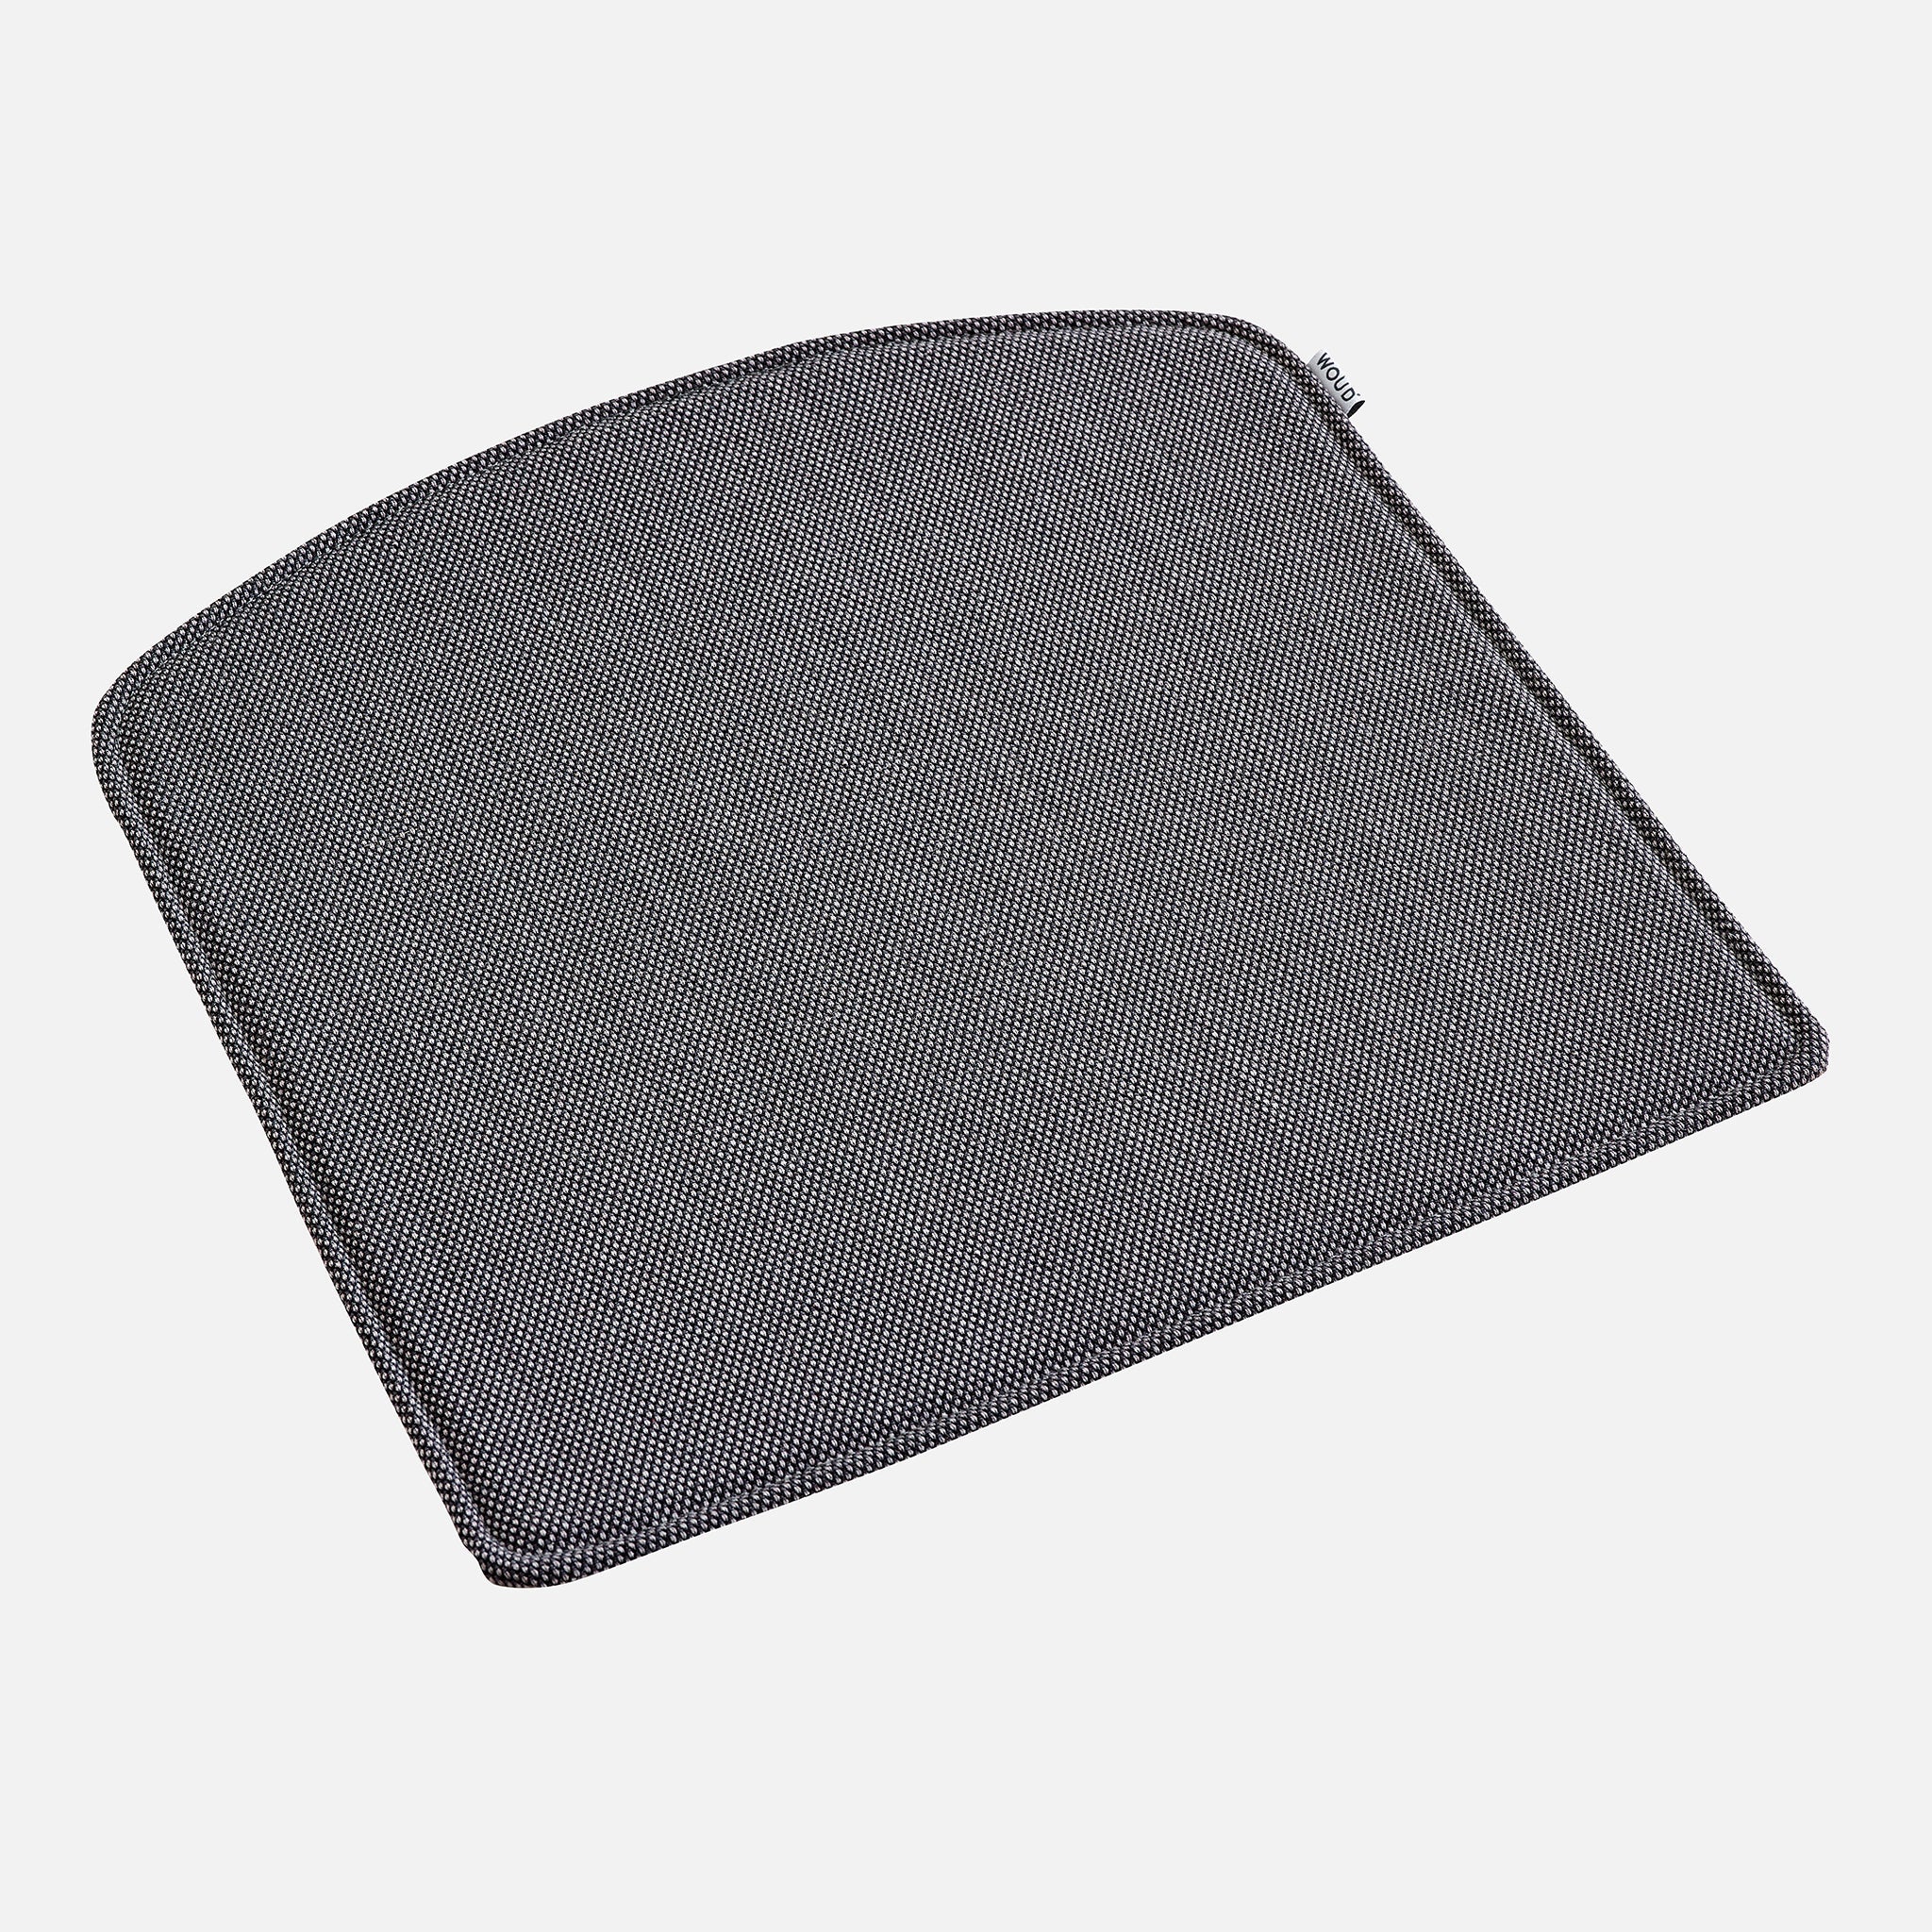 WOUD -  S.A.C. dining chair seat pad